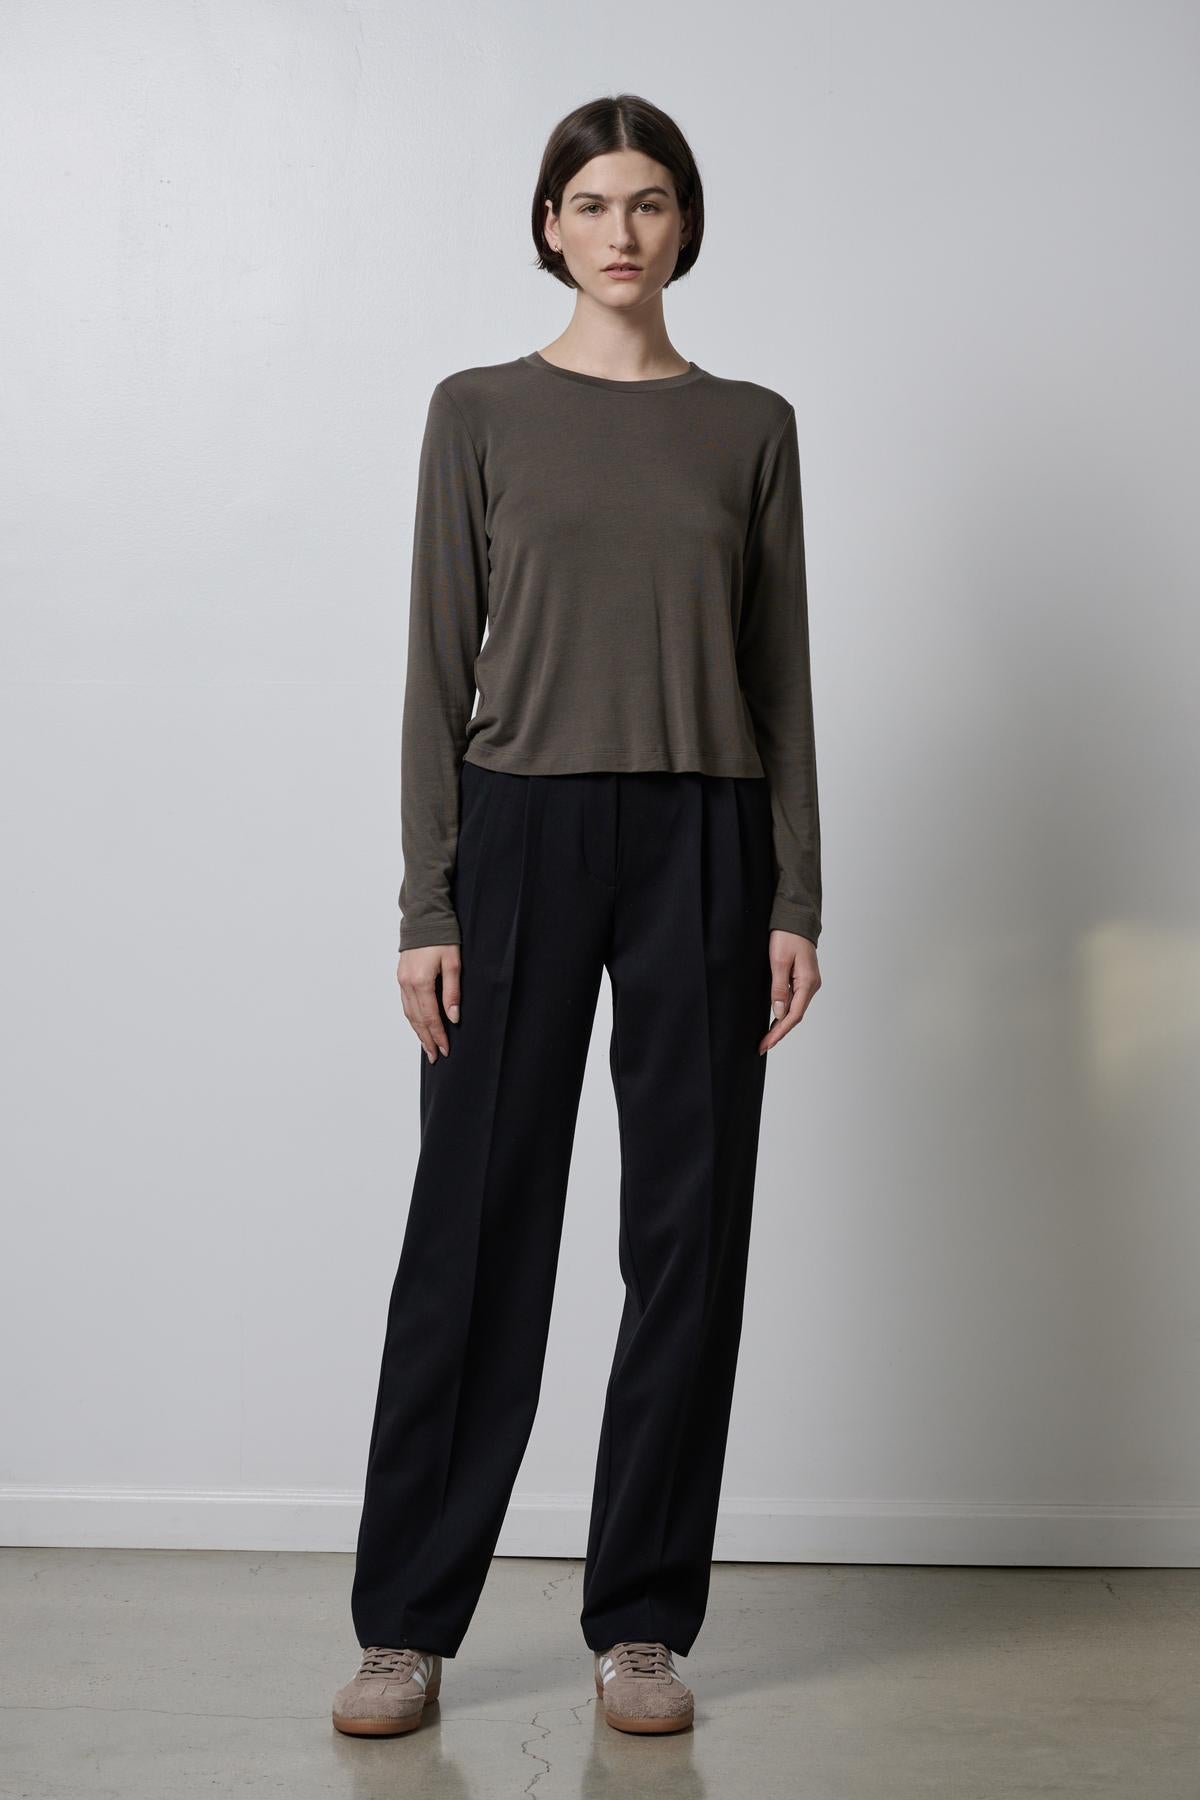 The model is wearing a Velvet by Jenny Graham PACIFICA TEE and soft hand black trousers.-35495907885249